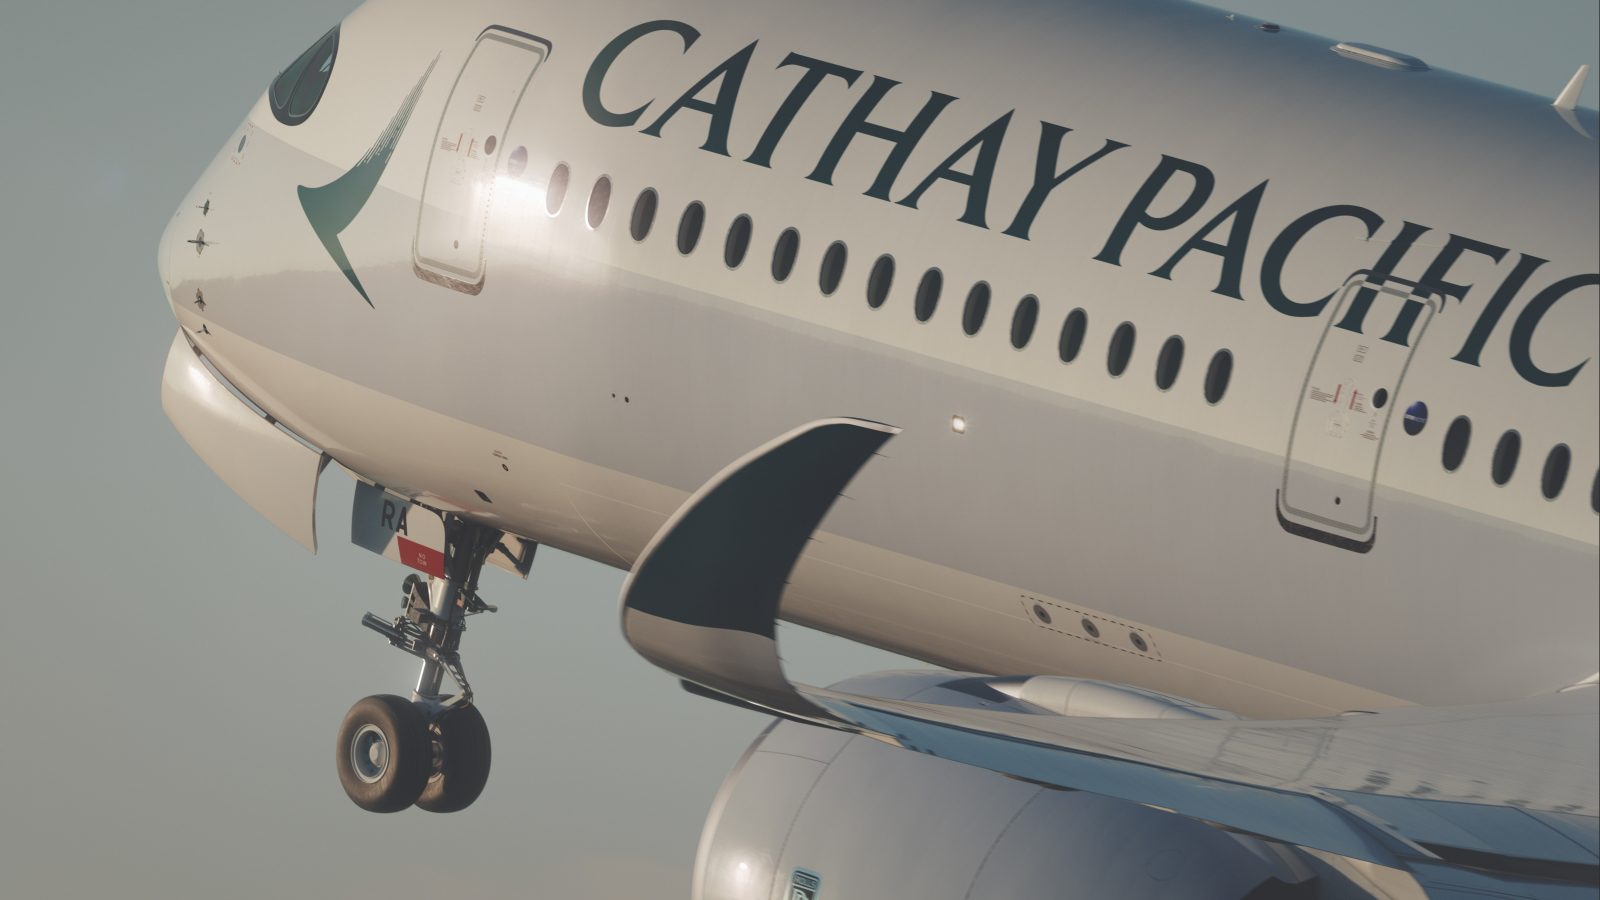 Cathay Pacific Chief Executive Talks to Bloomberg About Losses: Here's What We Learned